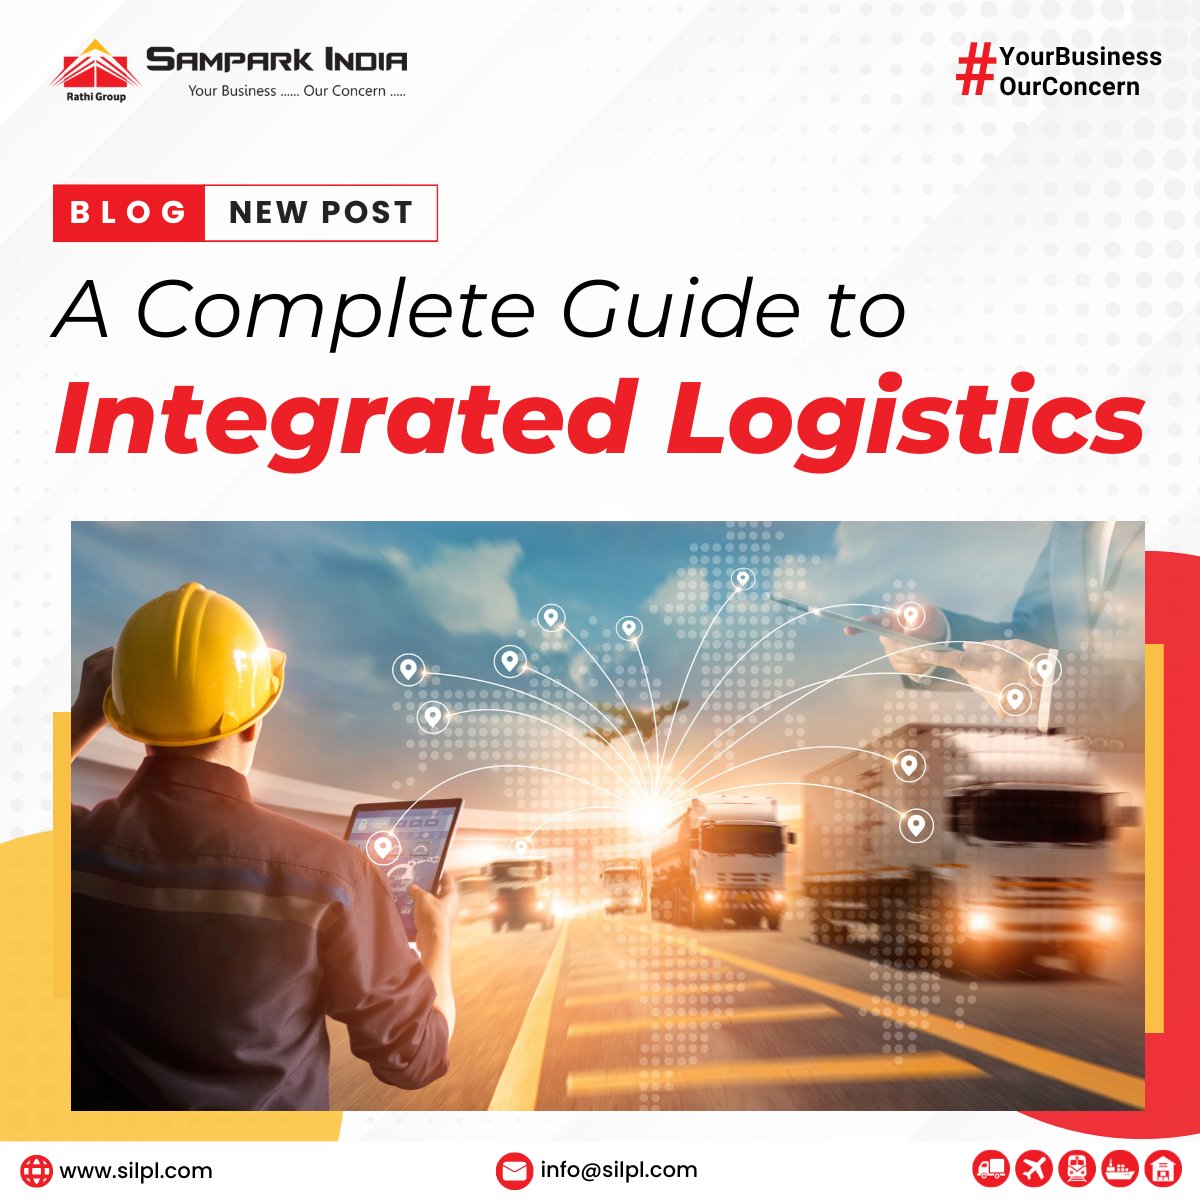 Uncover the secrets behind seamless supply chain management, optimized processes, and synchronized transportation in our latest blog post.

Click here👉bit.ly/3pkMOvc

#integratedlogistics #logisticscompany #logistics #samparkindialogistics #rathigroup #vocalforlocal